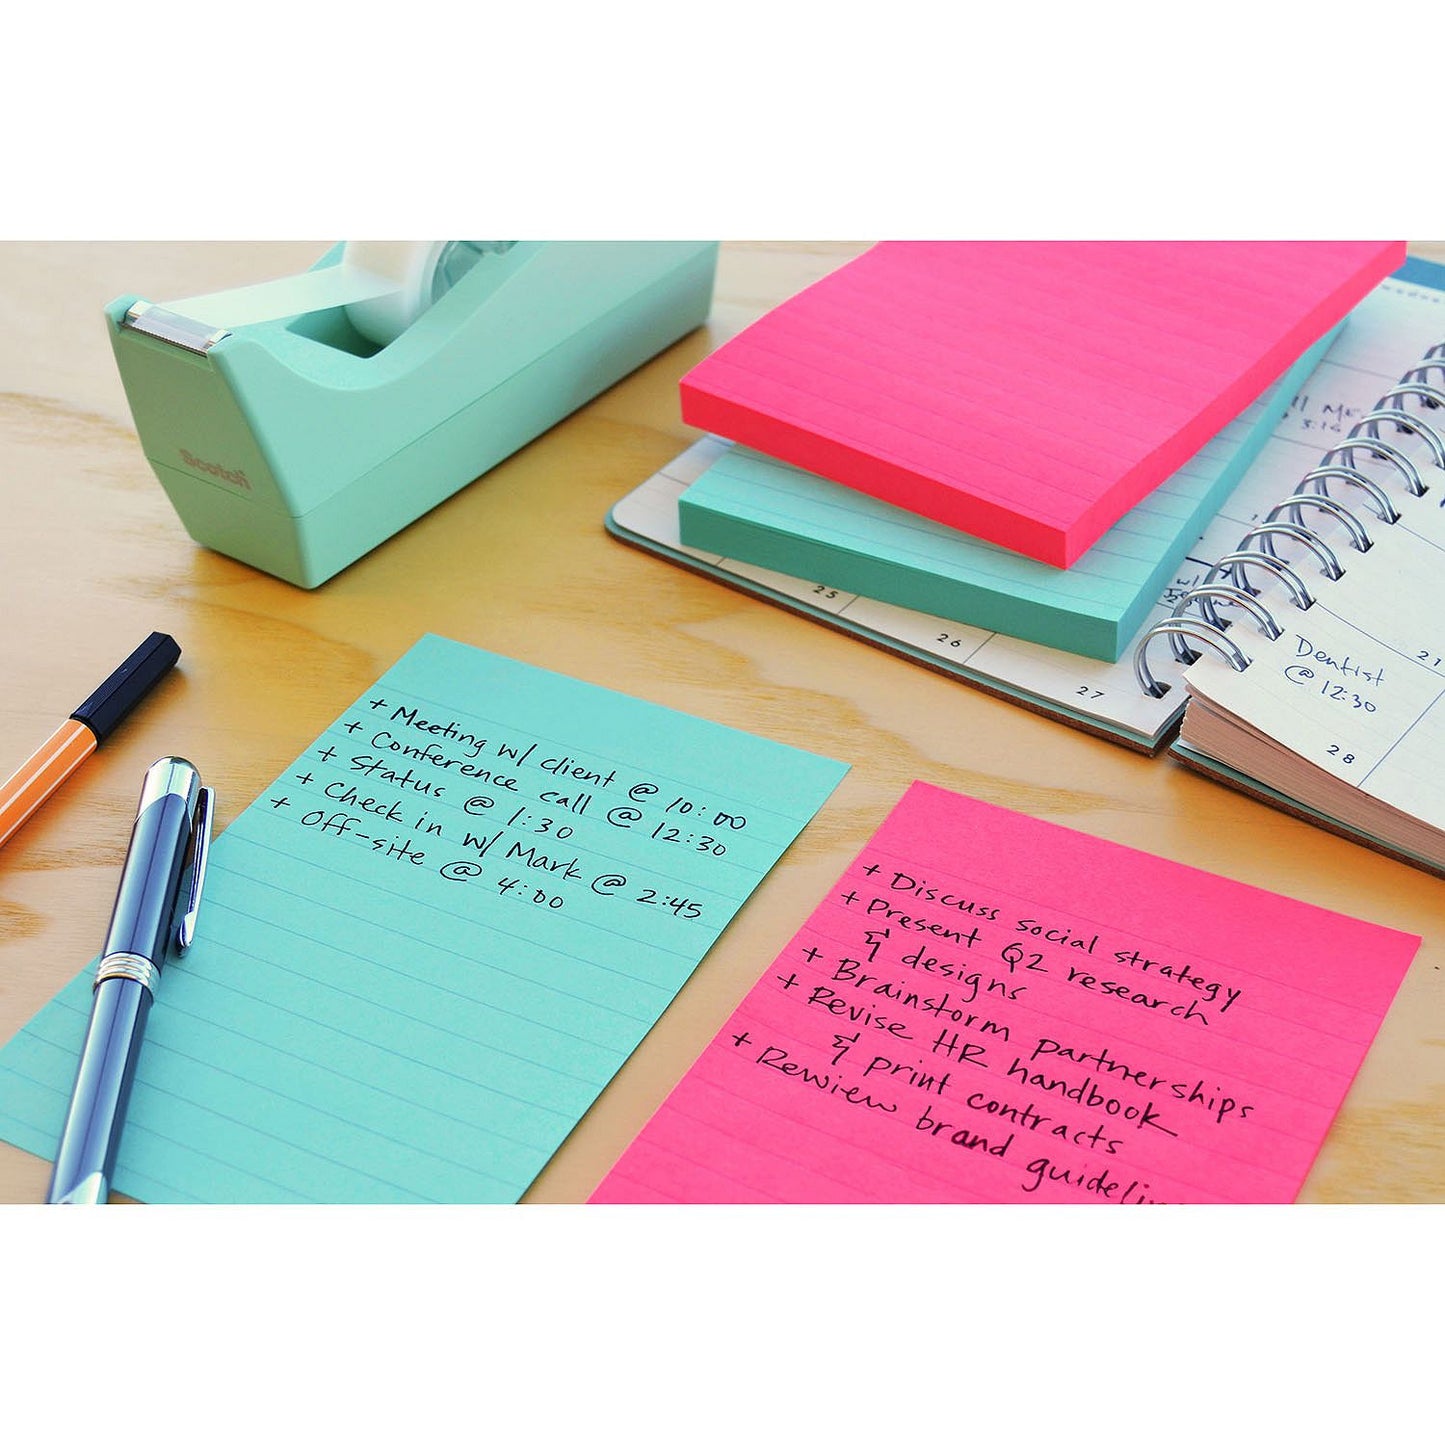 Post-it Super Sticky Notes, 4" x 6", 8 pads, 800 Total Sheets